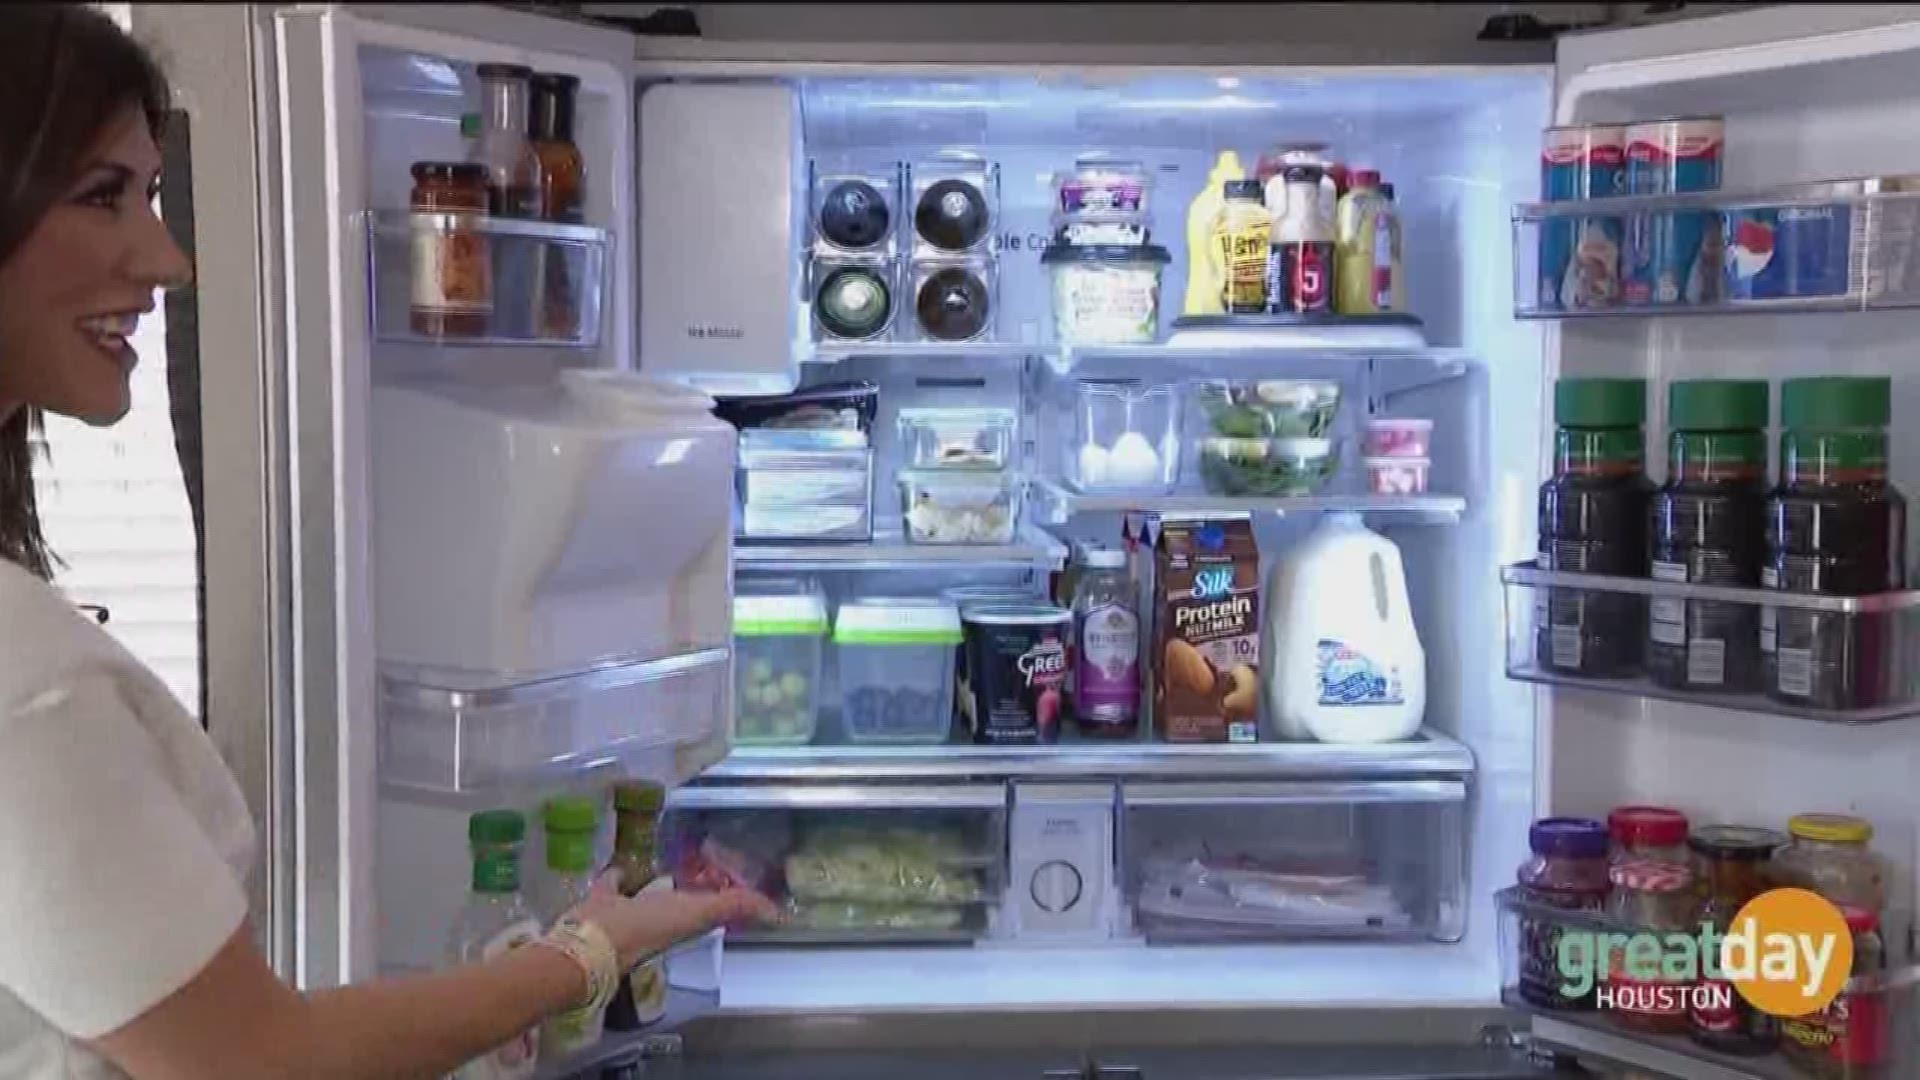 It's food for thought when it comes to cleaning out your fridge.  How to get organized and stay organized!  